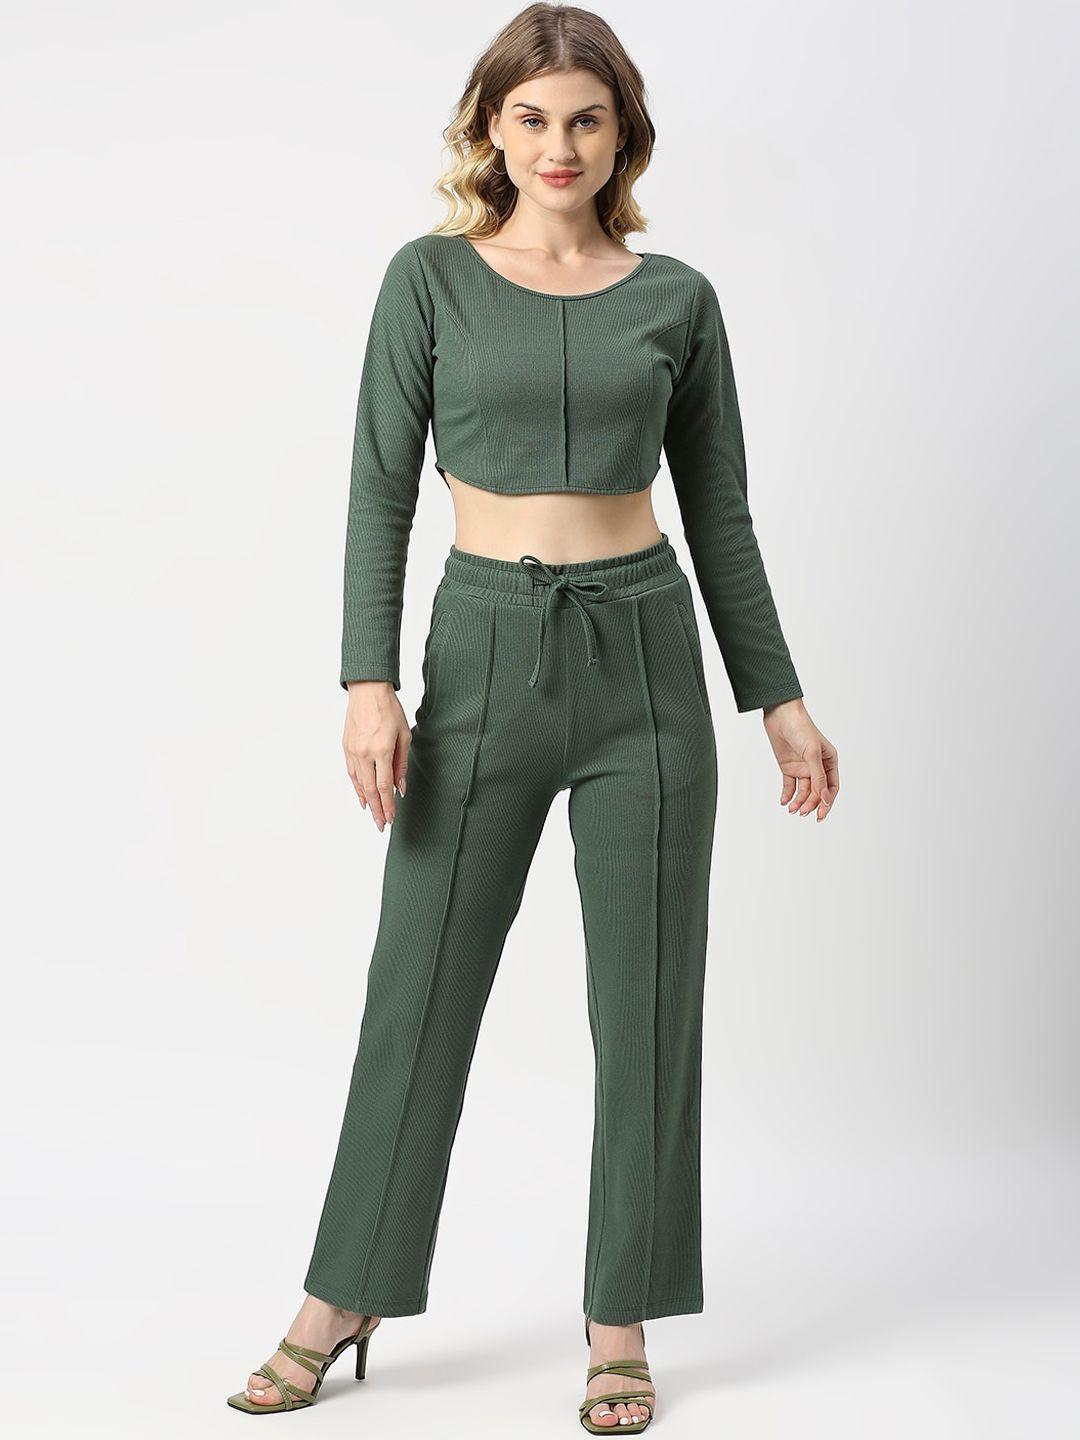 blamblack women paneled top with trousers co-ords